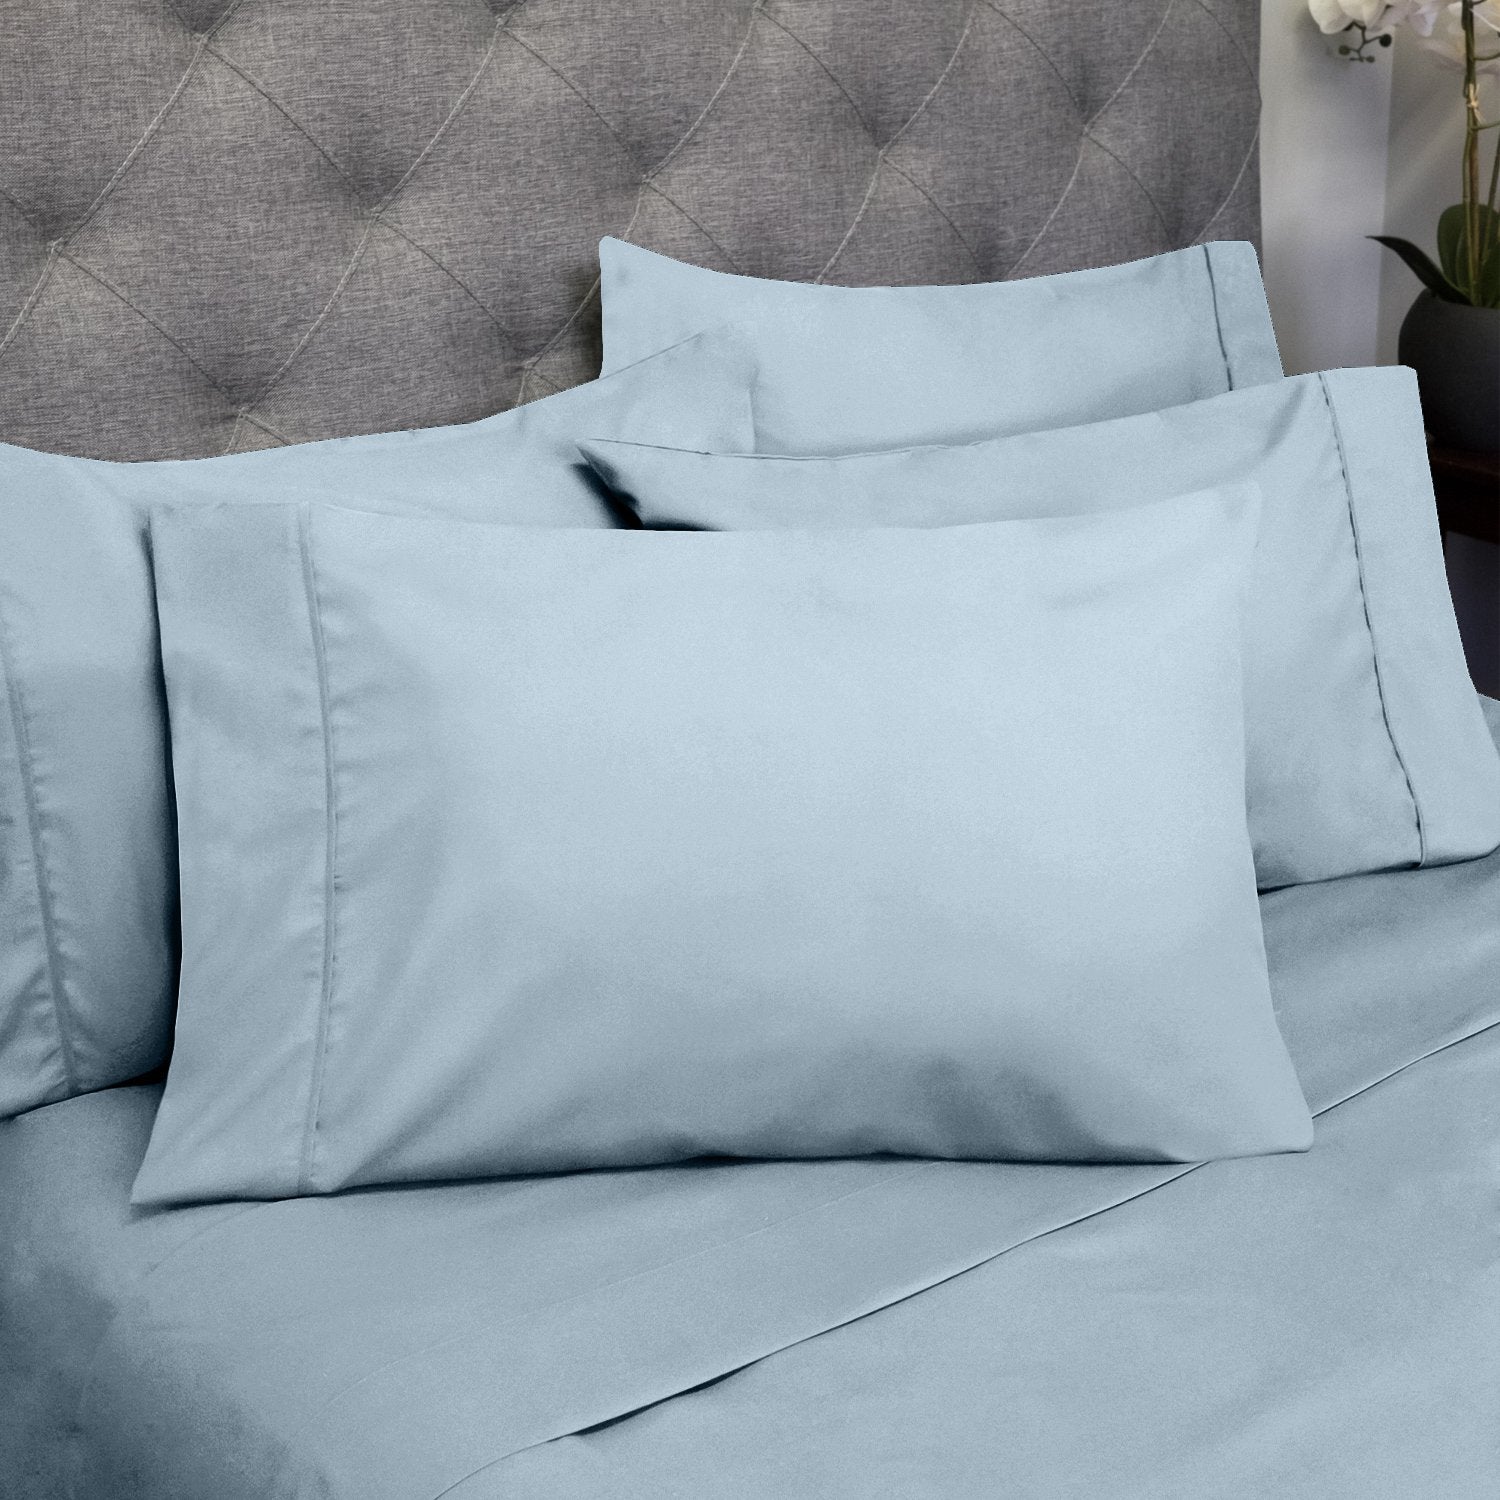 Deluxe 6-Piece Bed Sheet Set (Misty Blue) - Pillowcases